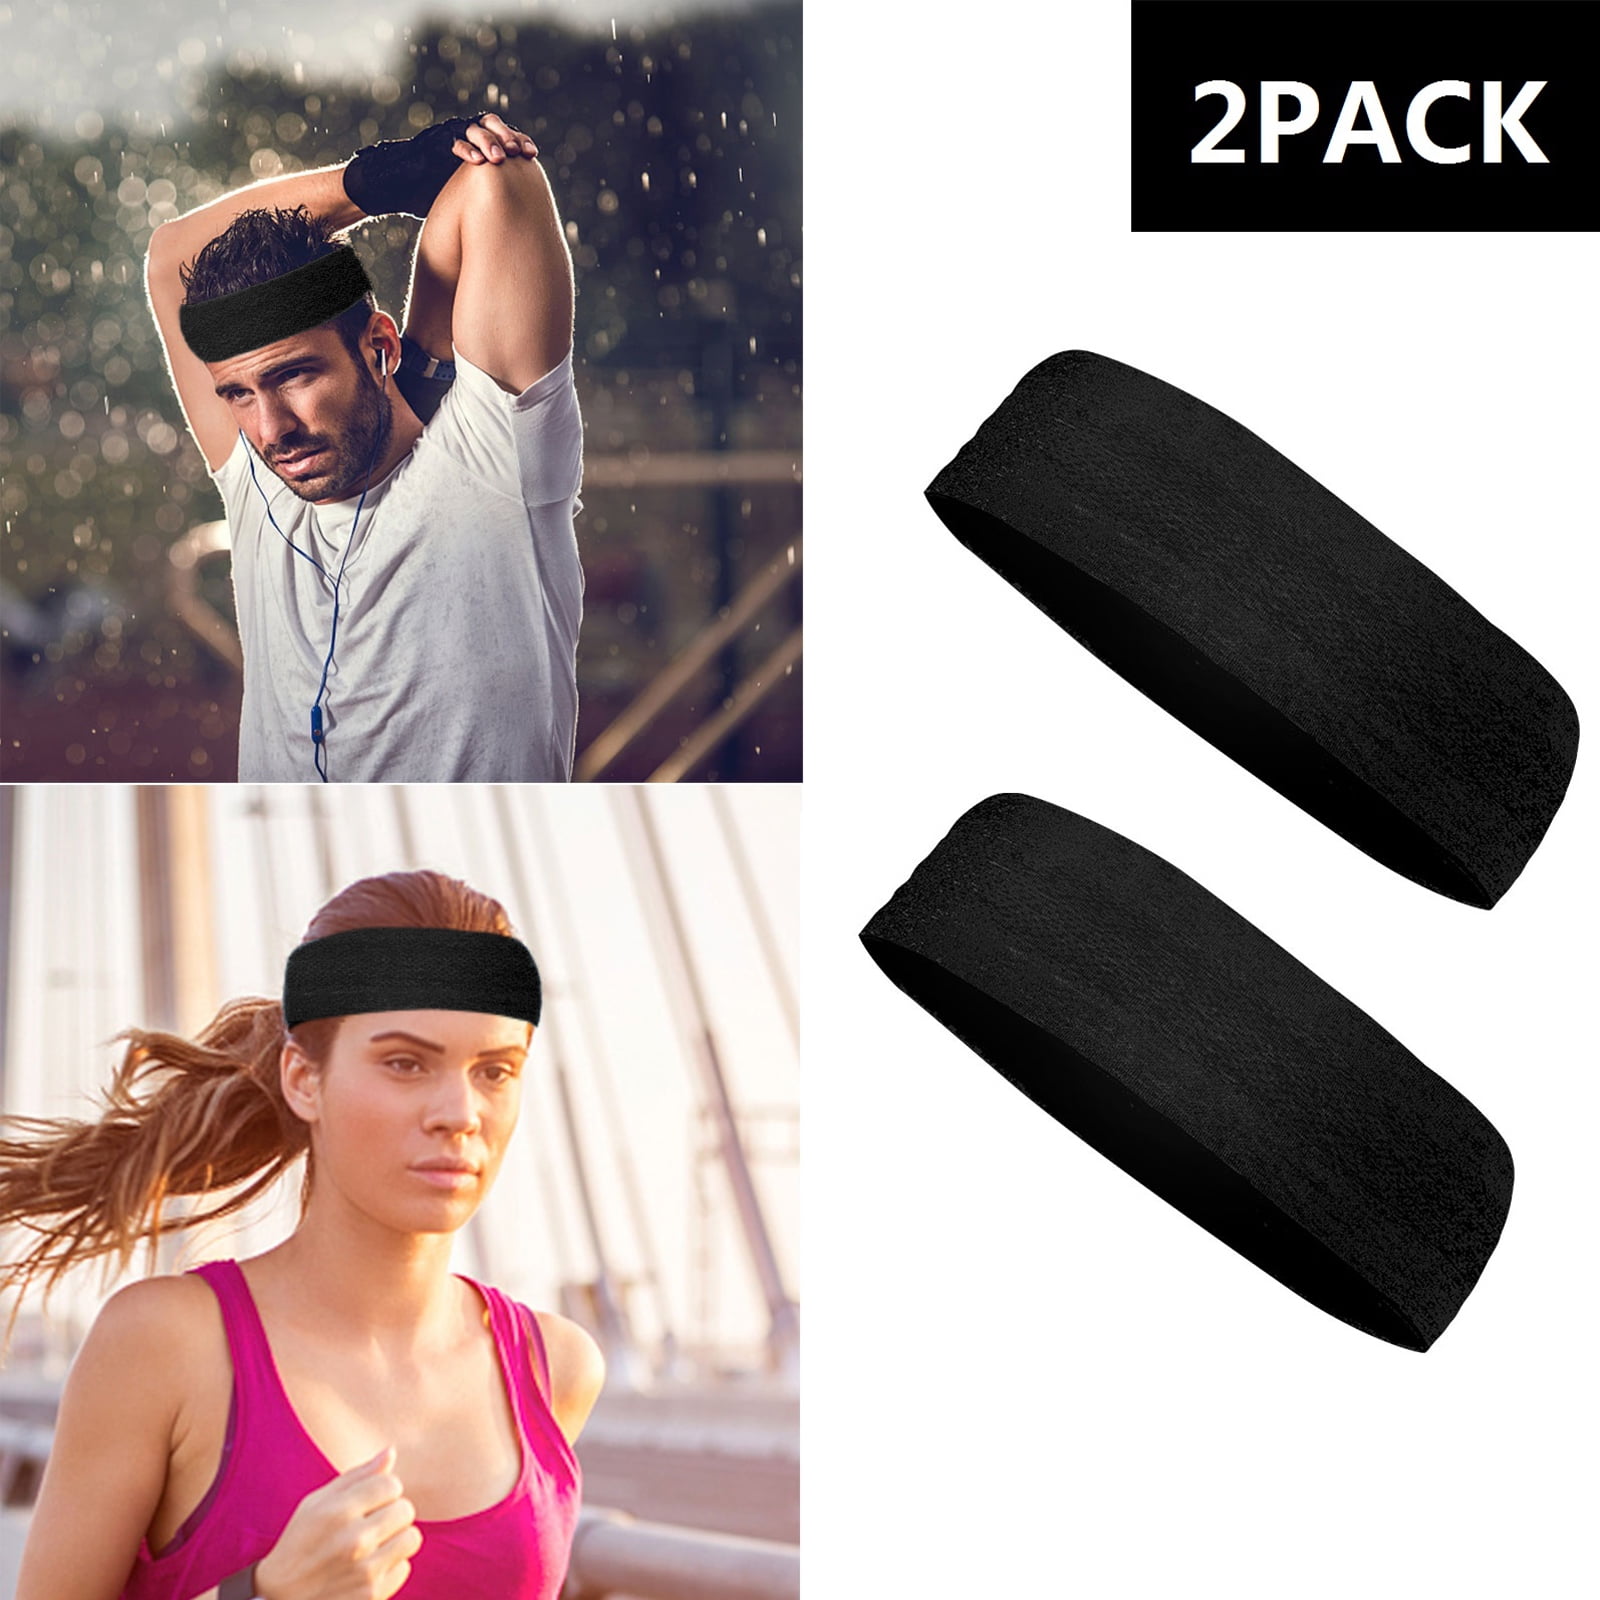 Performance Stretch & Moisture Wicking for Running Work Out Crossfit Gym Tennis Basketball Guys Sweatband Sports Headband for Women Men Unisex COOLOO 2 Pack Womens Headband 